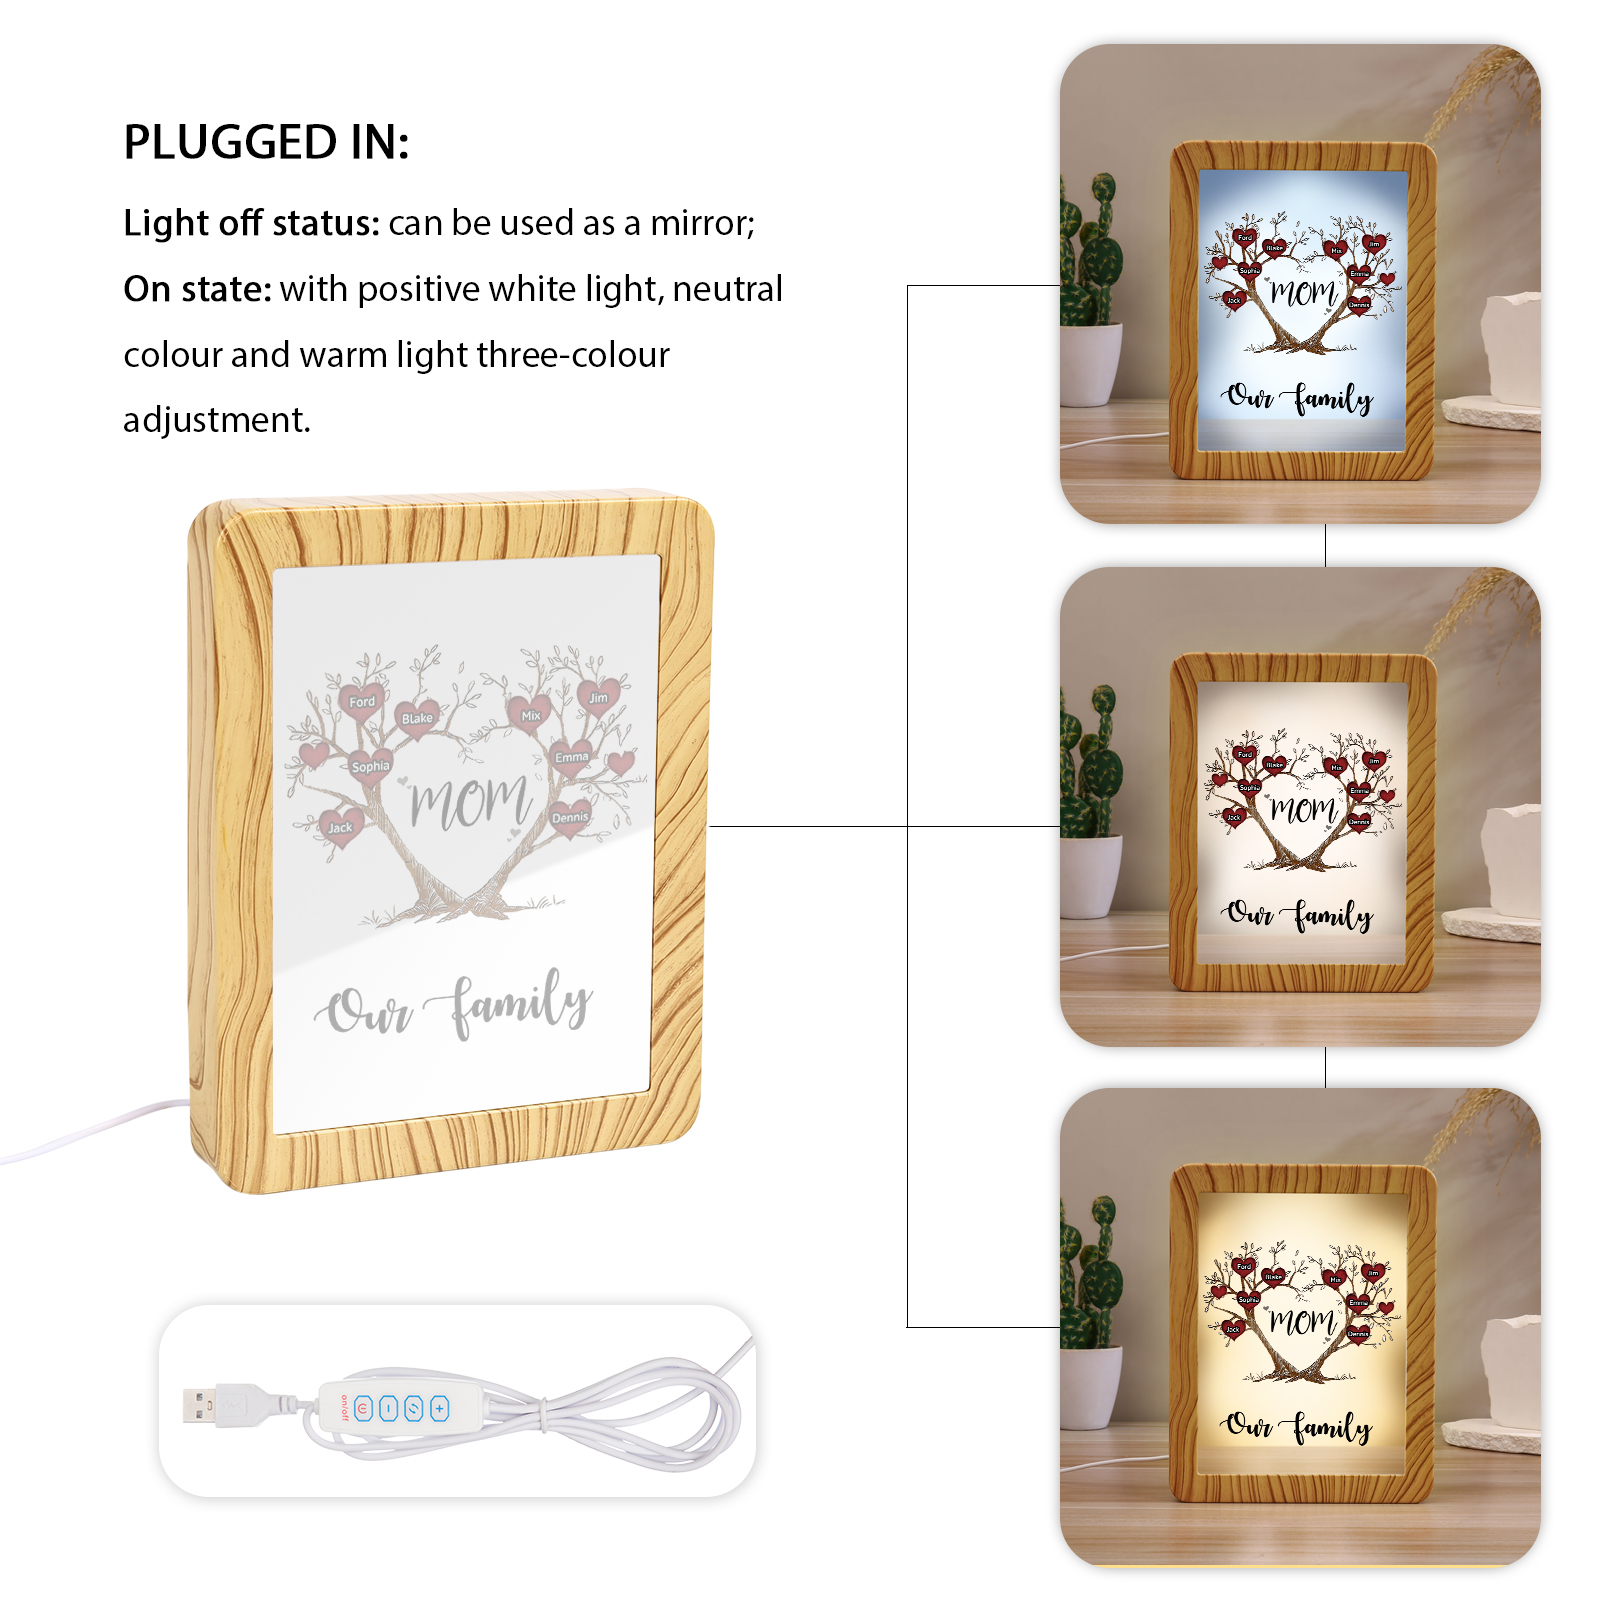 8 Names - Personalized Home Mirror Photo Frame Night Light Insert/Rechargeable Custom Text LED Night Light Gift for Mom